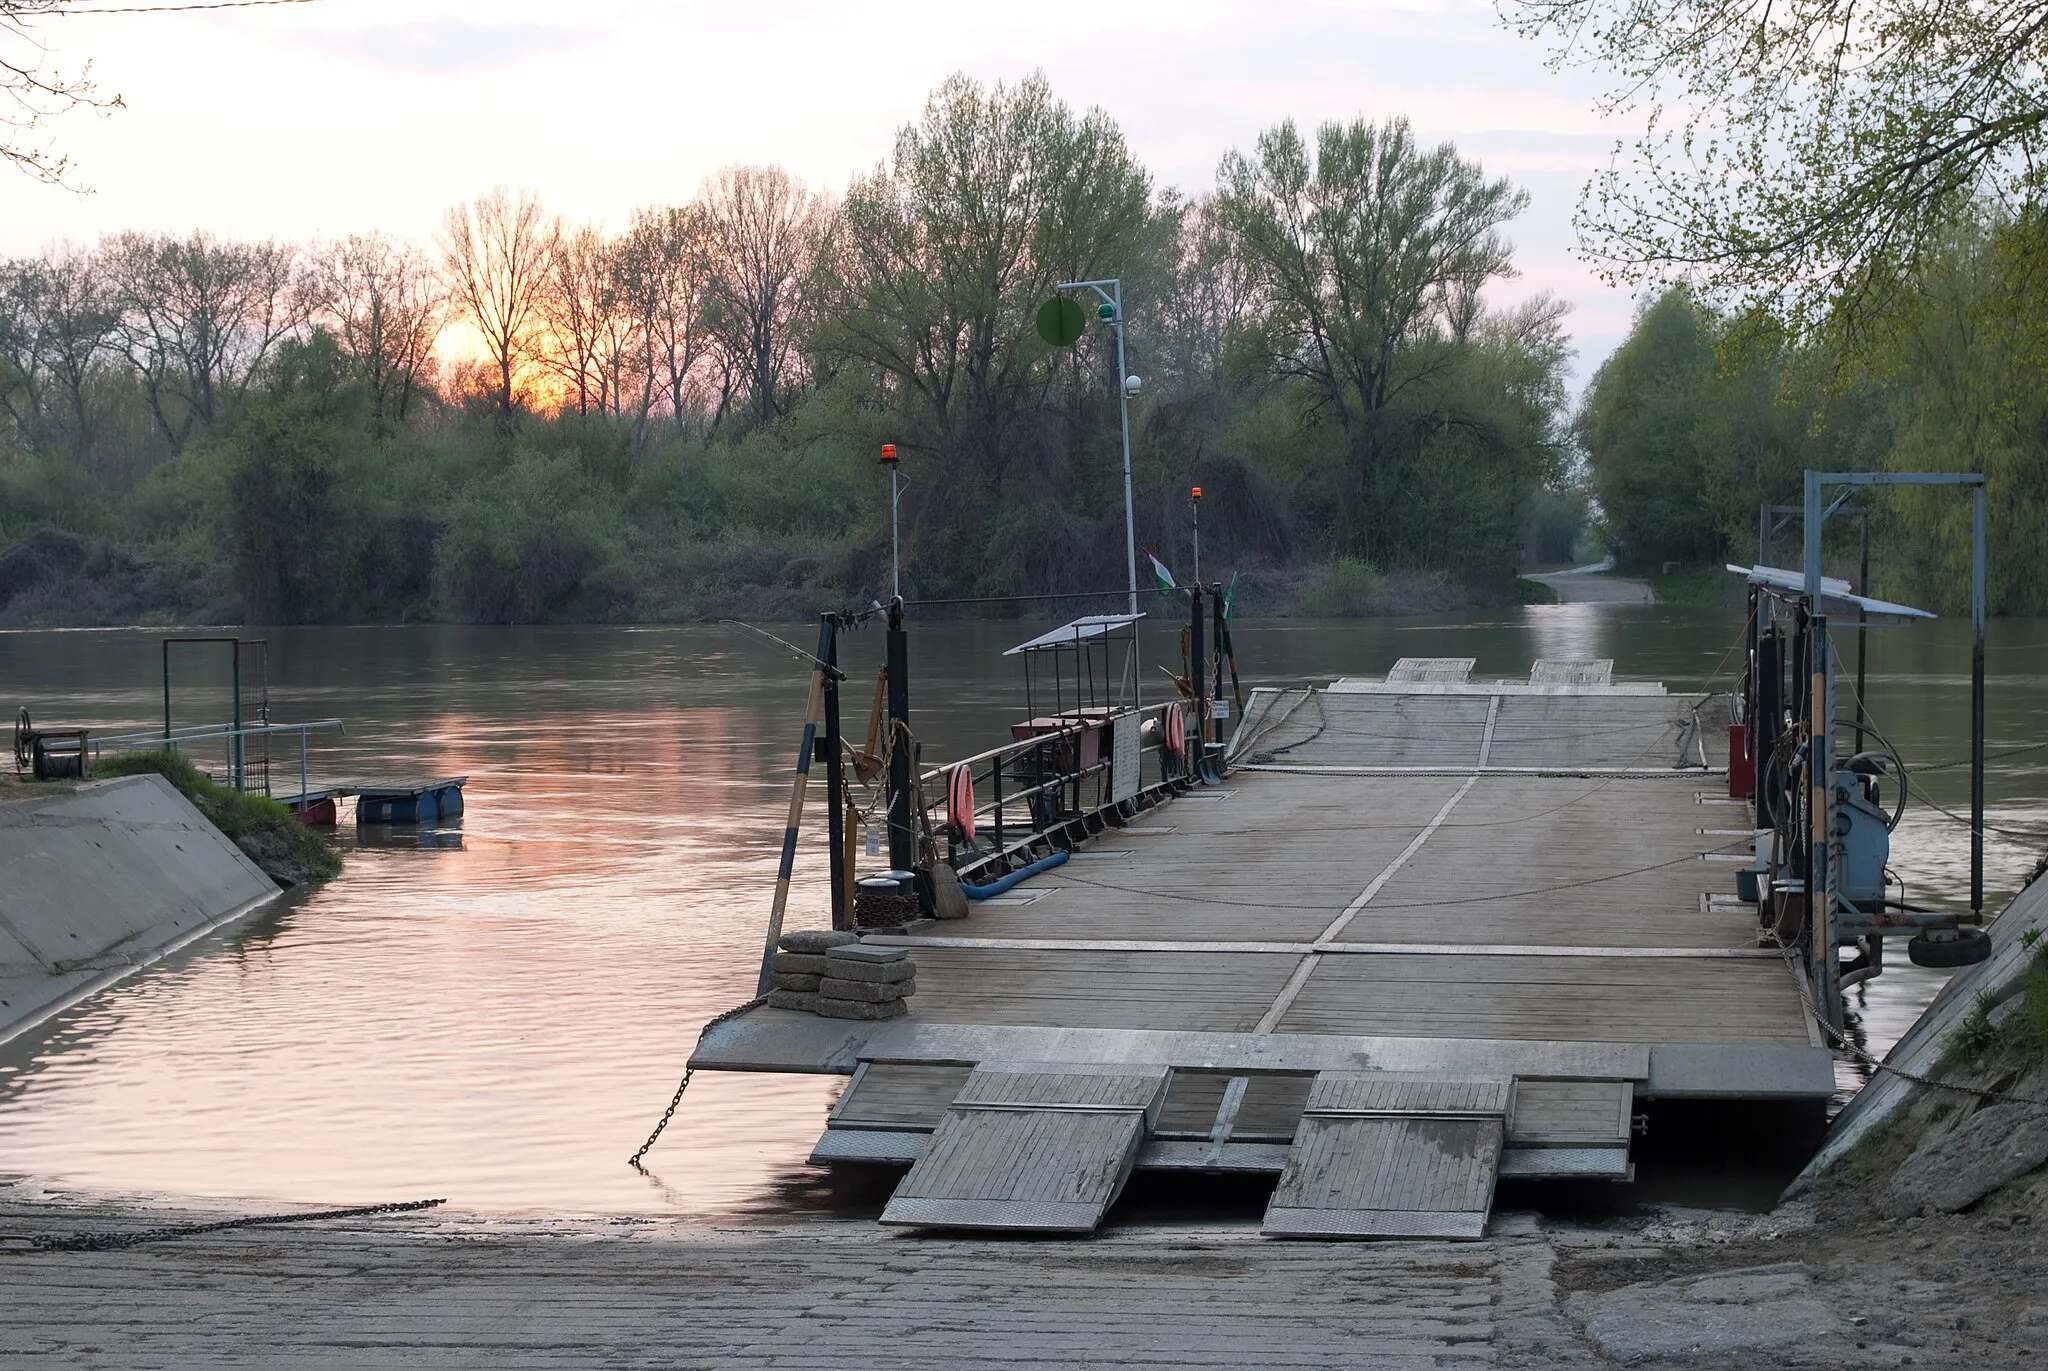 Photo showing: The cable ferry in Mindszent in the evening at sunset